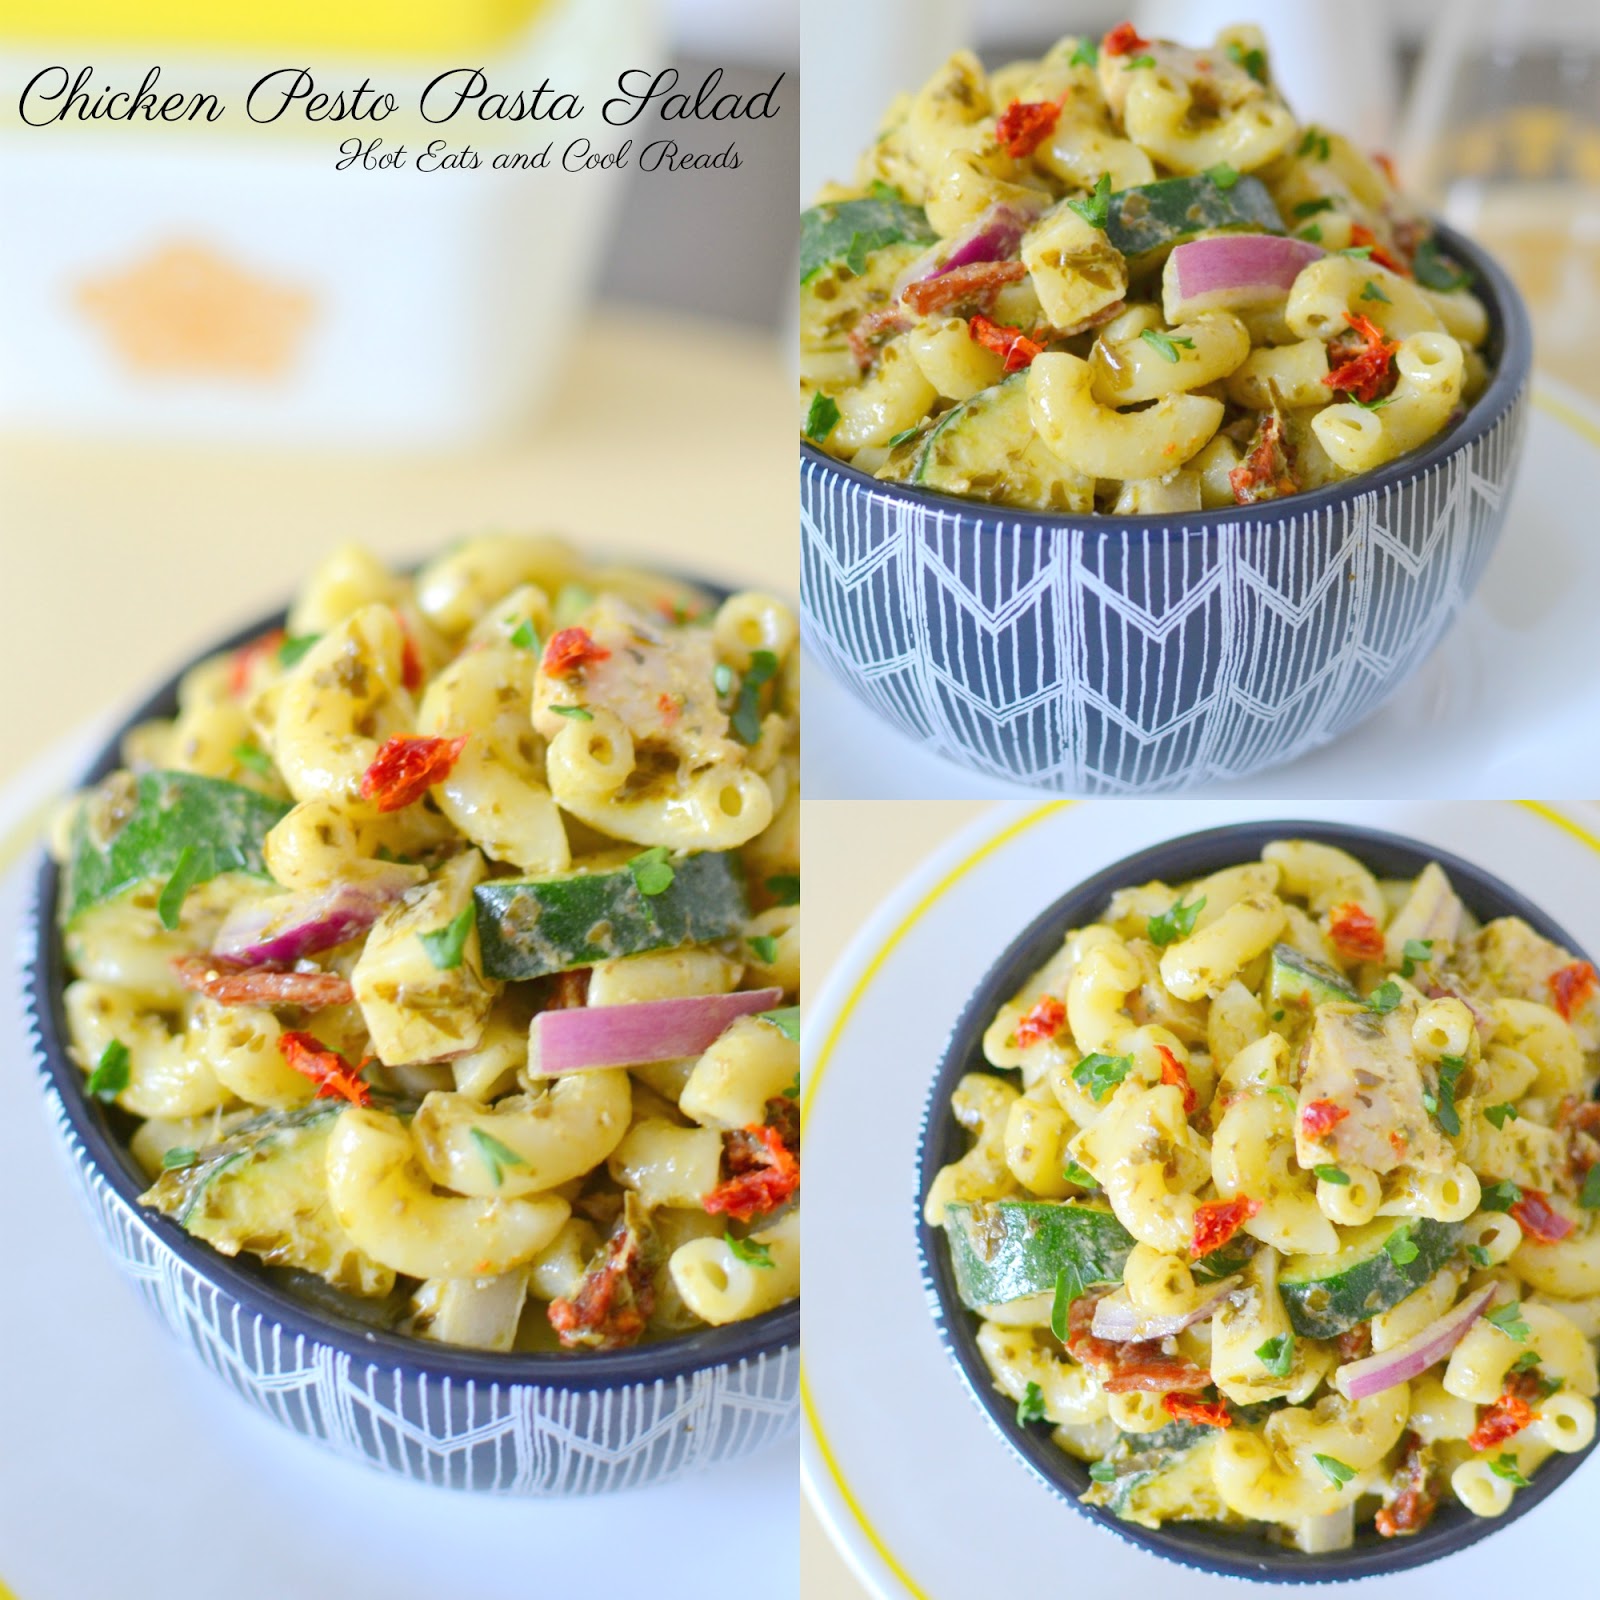 This elbow macaroni pasta salad is packed with chicken, bacon, sun dried tomatoes, zucchini and so much more! Great for any summer picnic or barbecue and a great way to use rotisserie chicken!